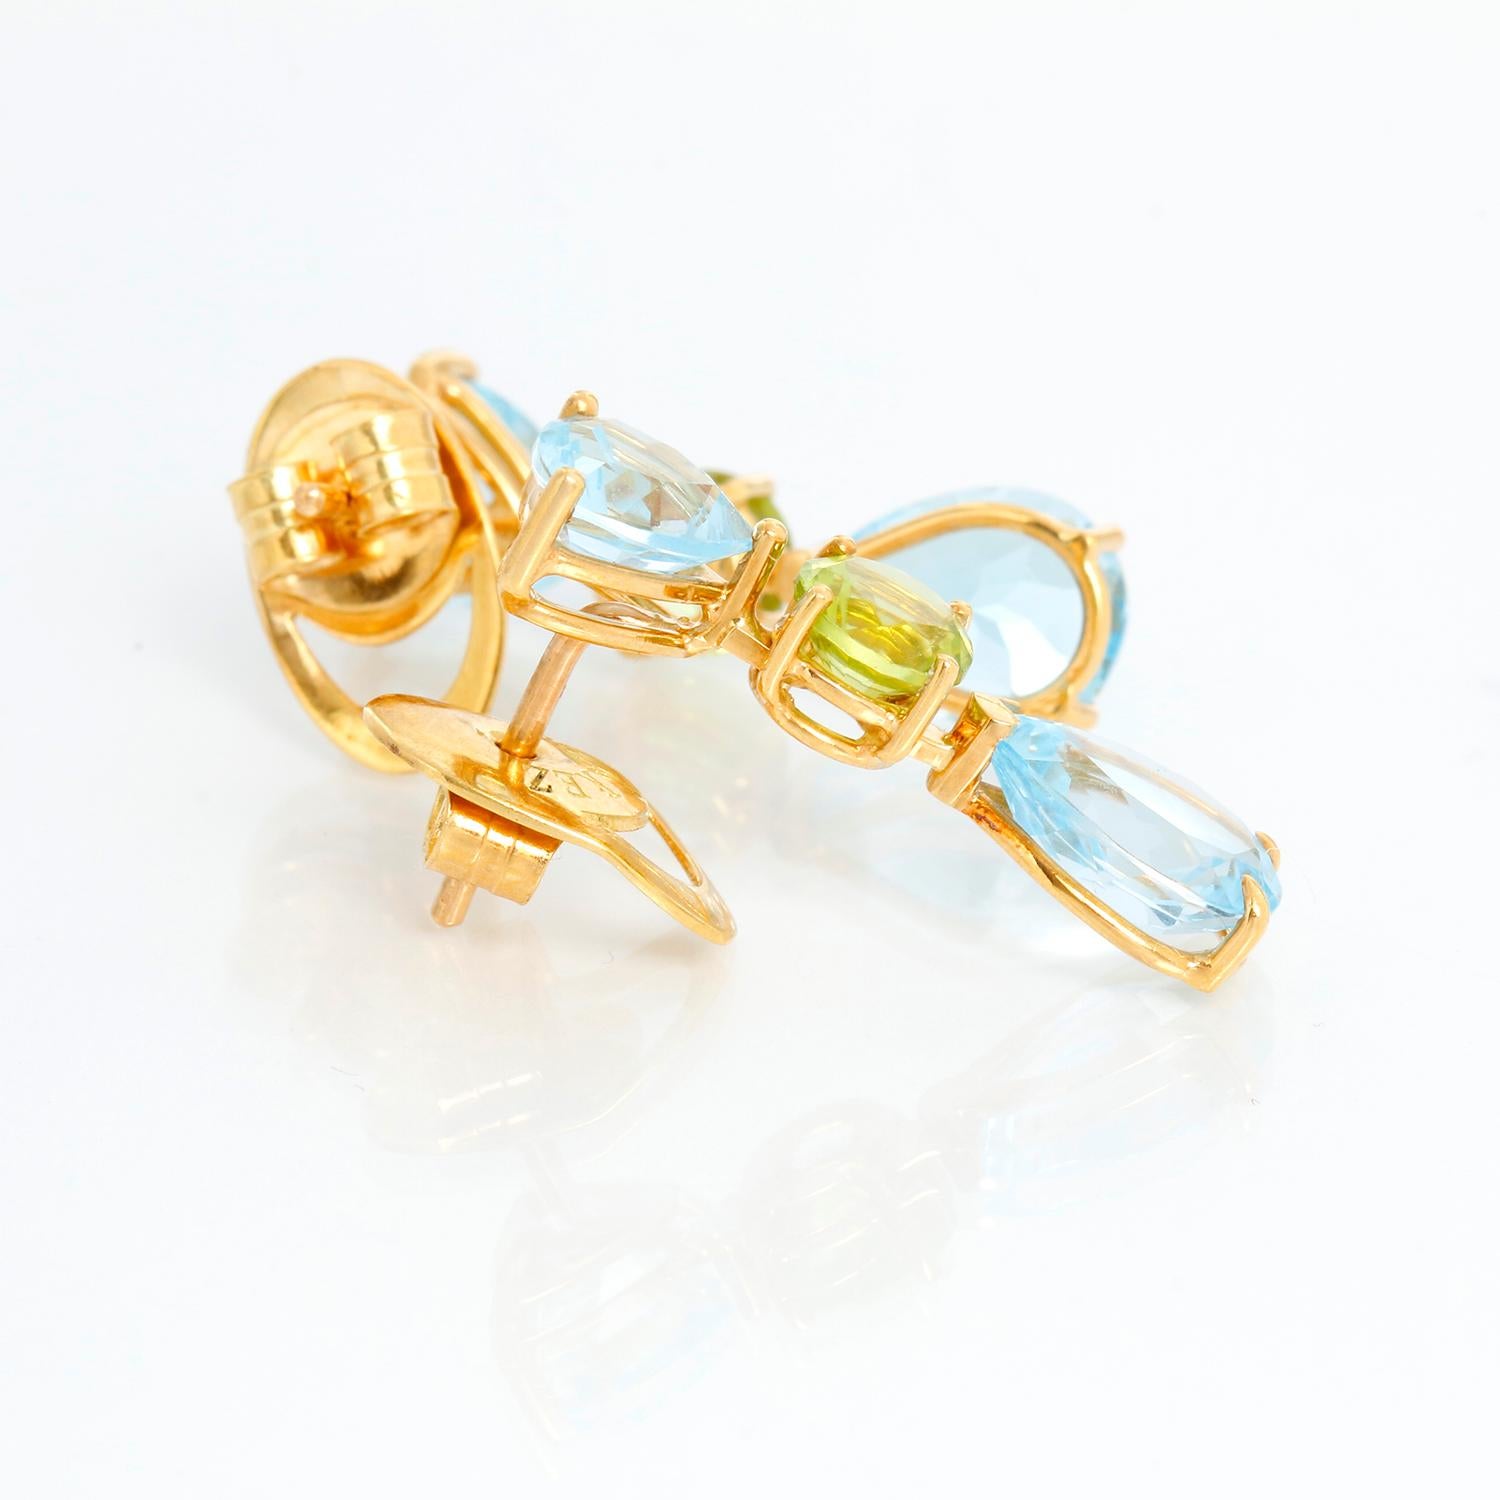 Suarez 18K Yellow Gold Blue Topaz & Peridot Earrings In Excellent Condition For Sale In Dallas, TX